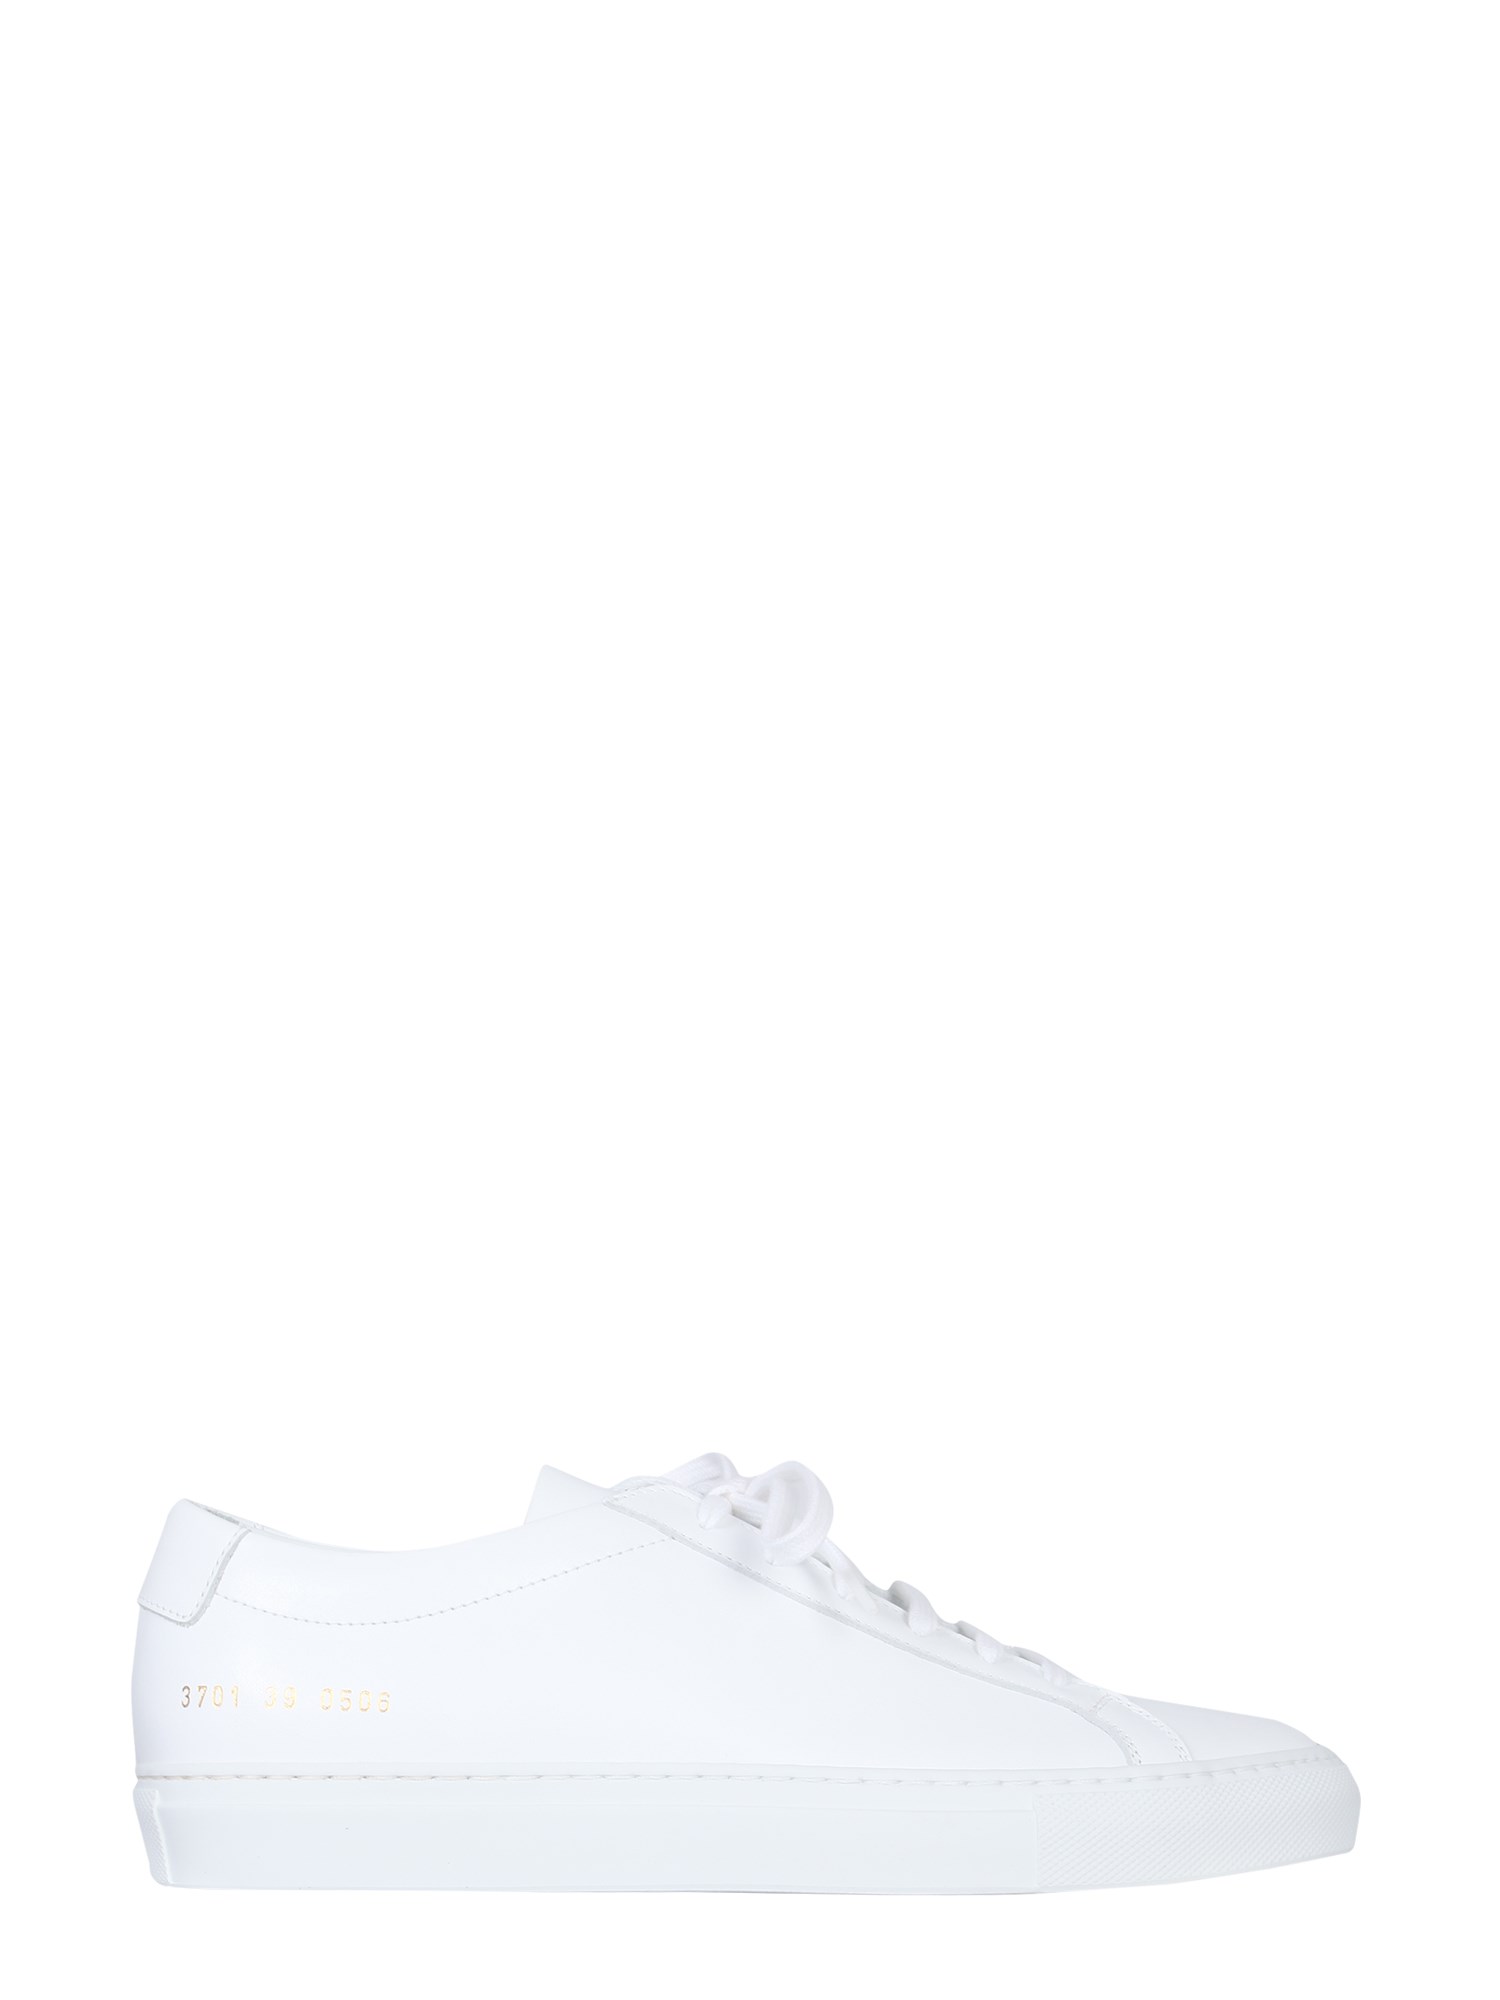 common projects original achilles low sneakers